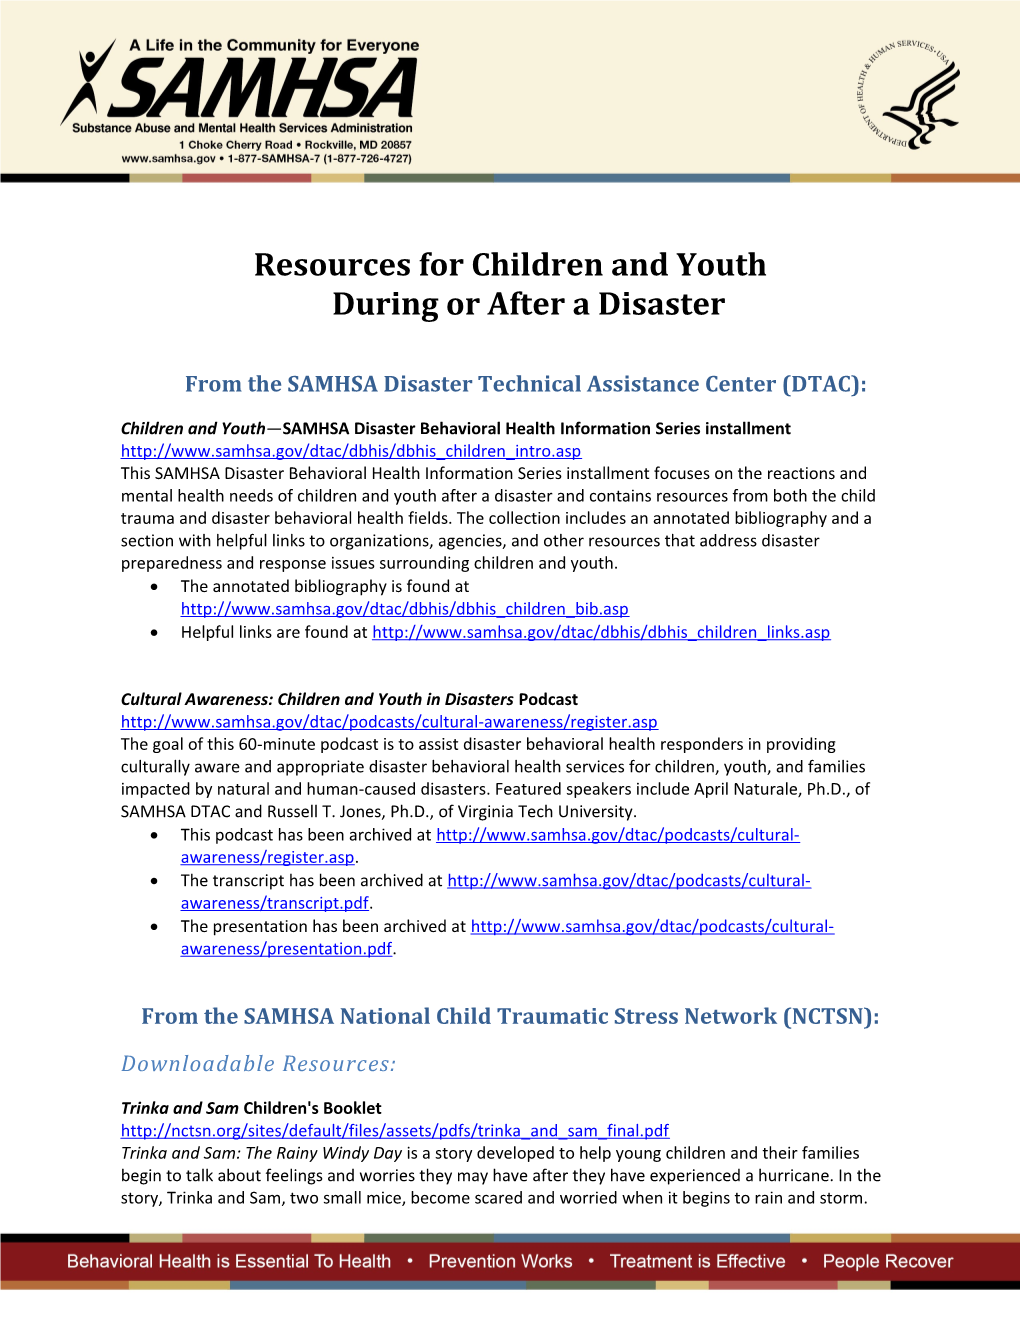 Resources for Children and Youthduring Or After a Disaster